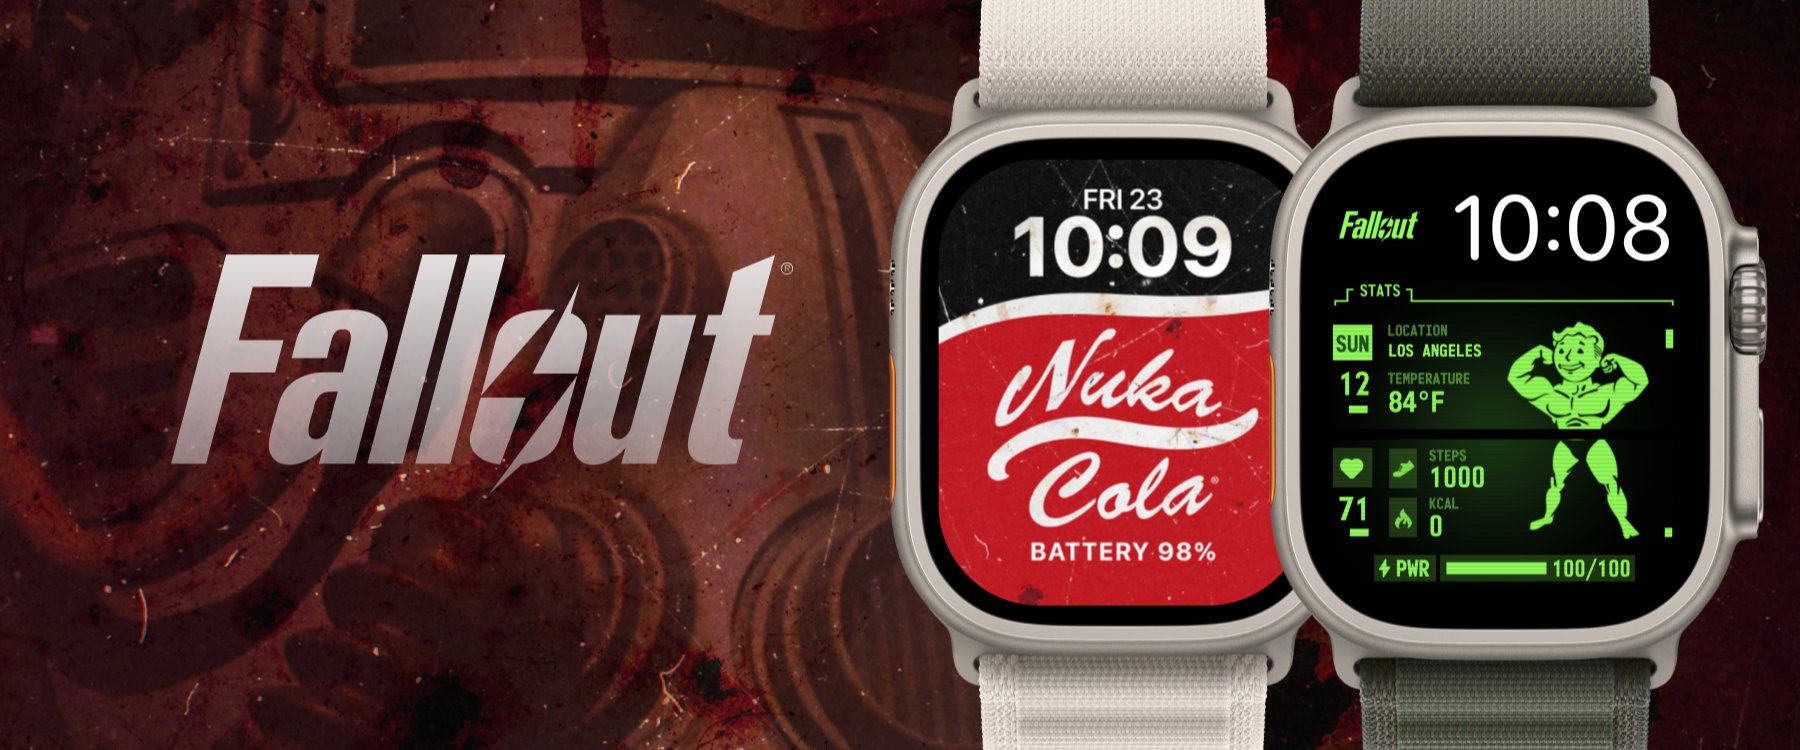 Facer、Apple Watch用「Fallout」公式デザインを配布！ - GAME Watch